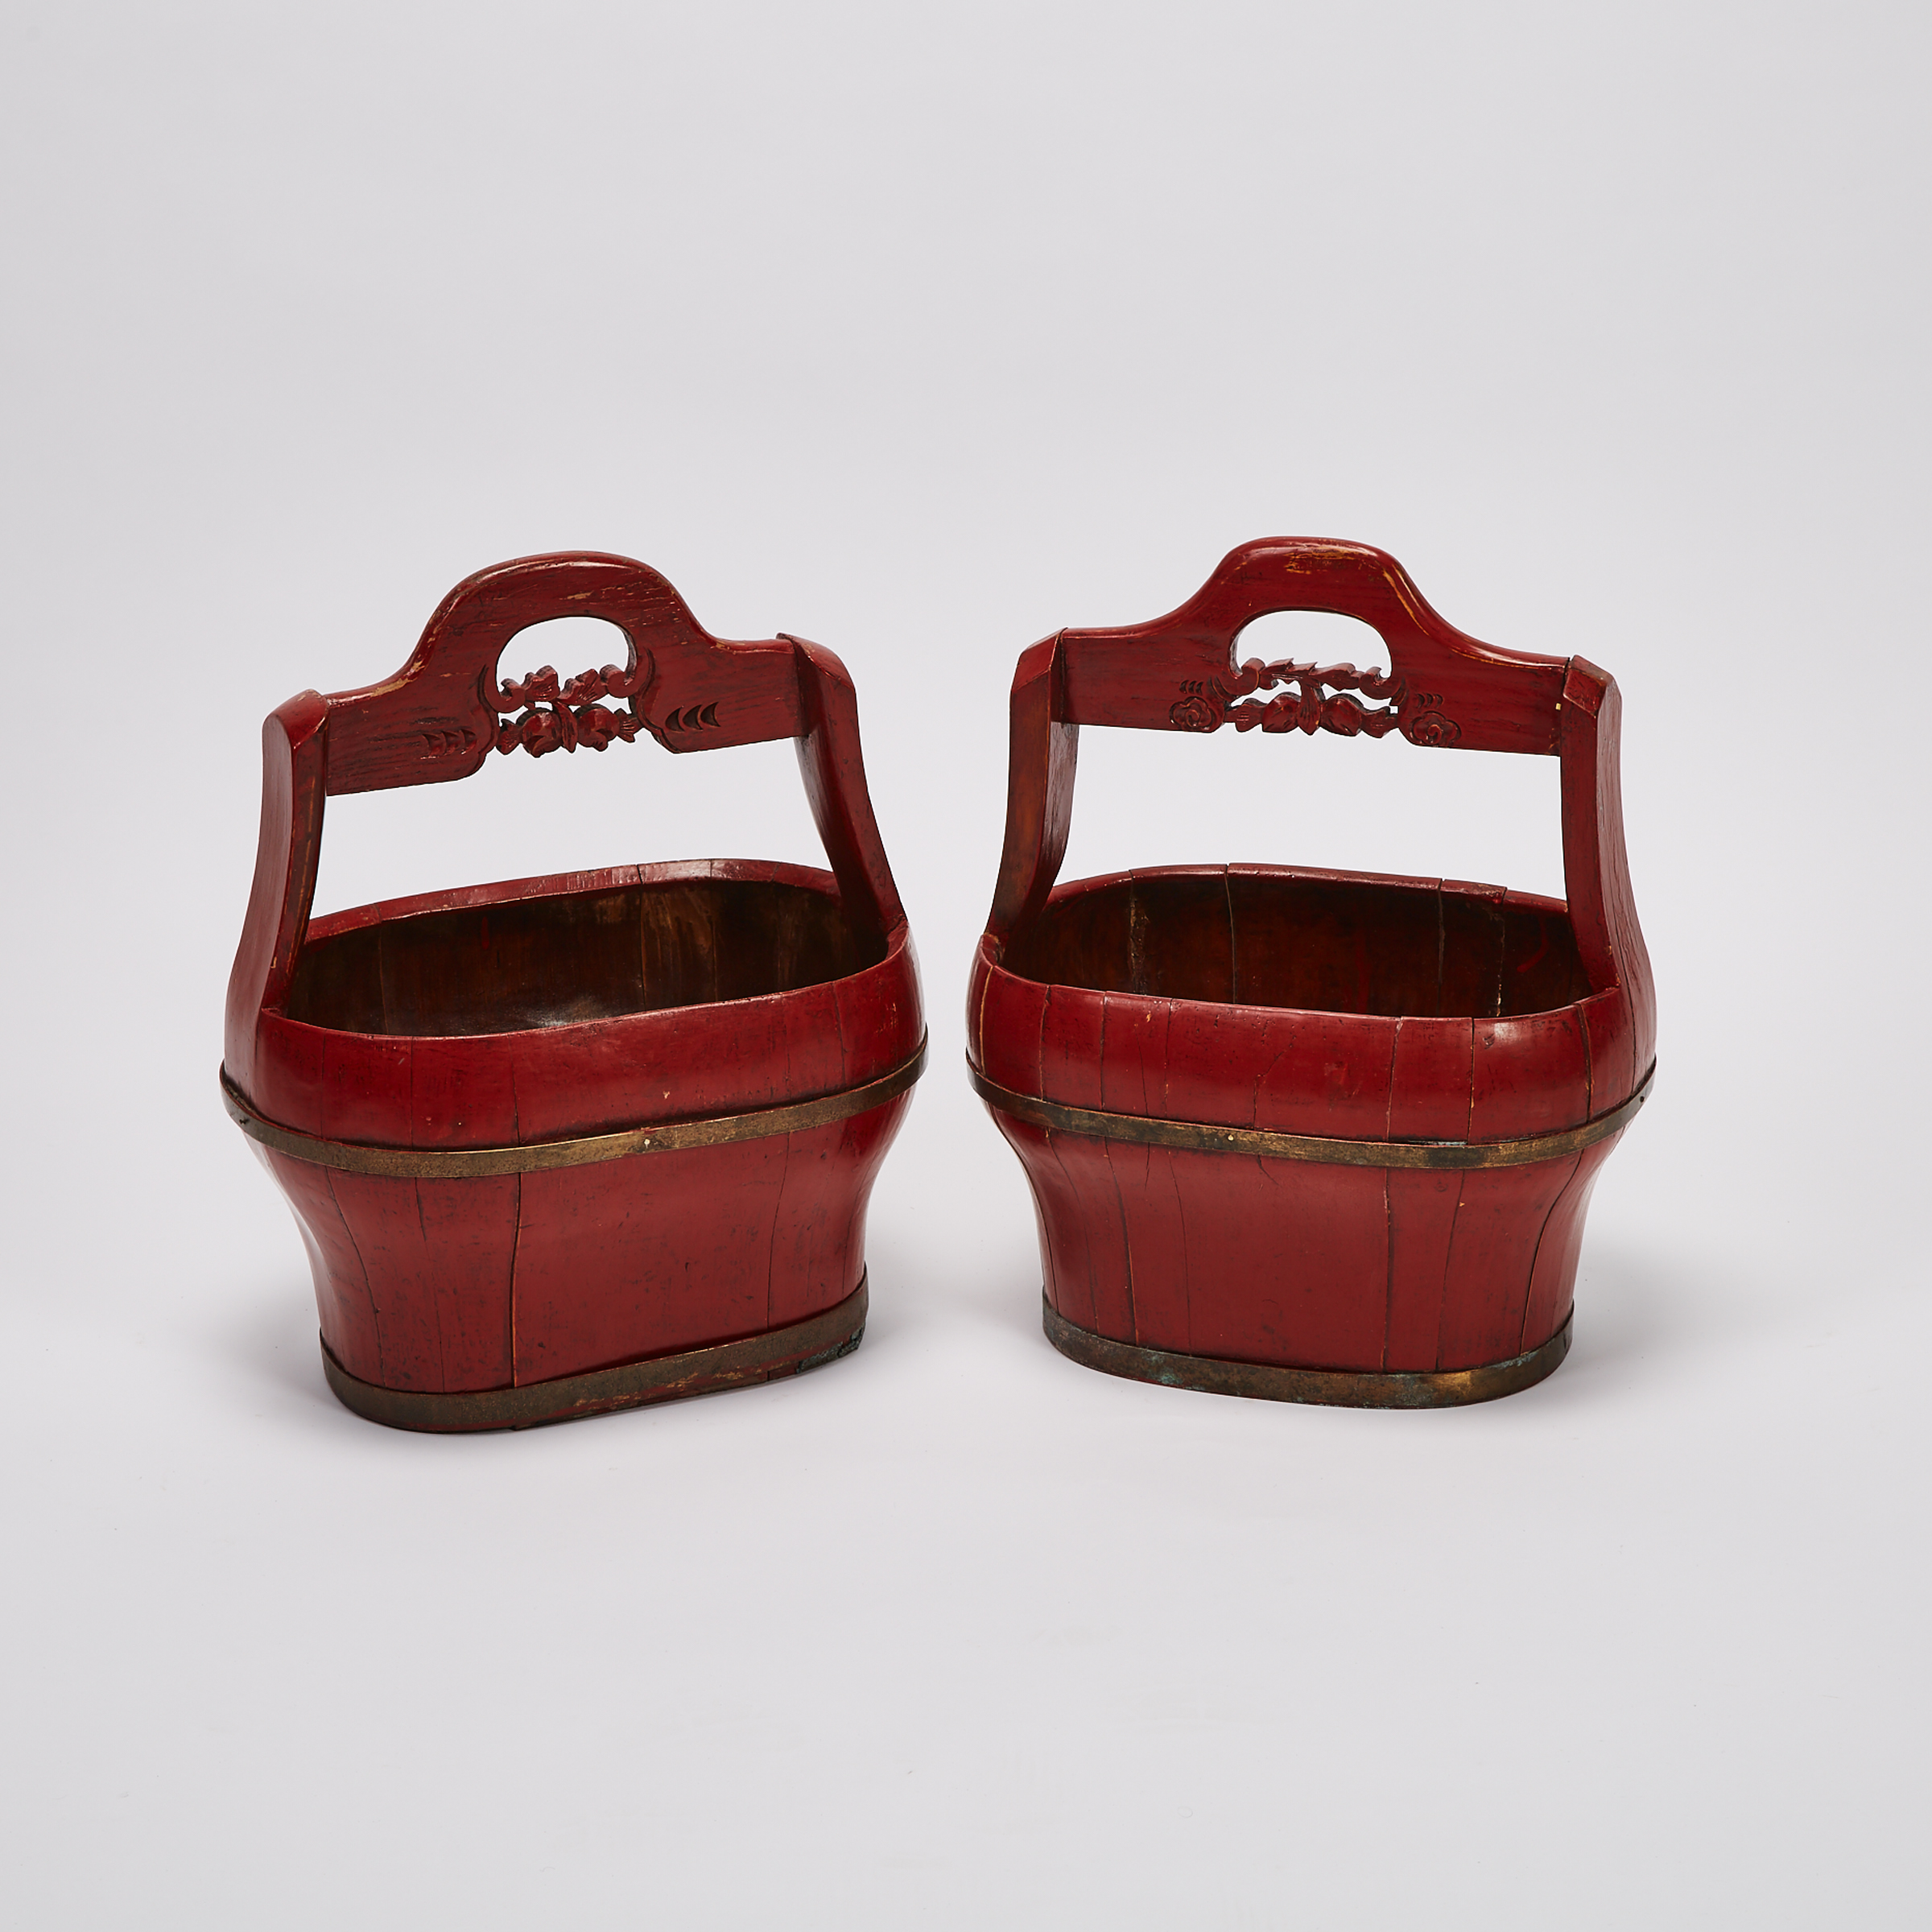 A Pair of Chinese Red Lacquer Baskets, 19th Century